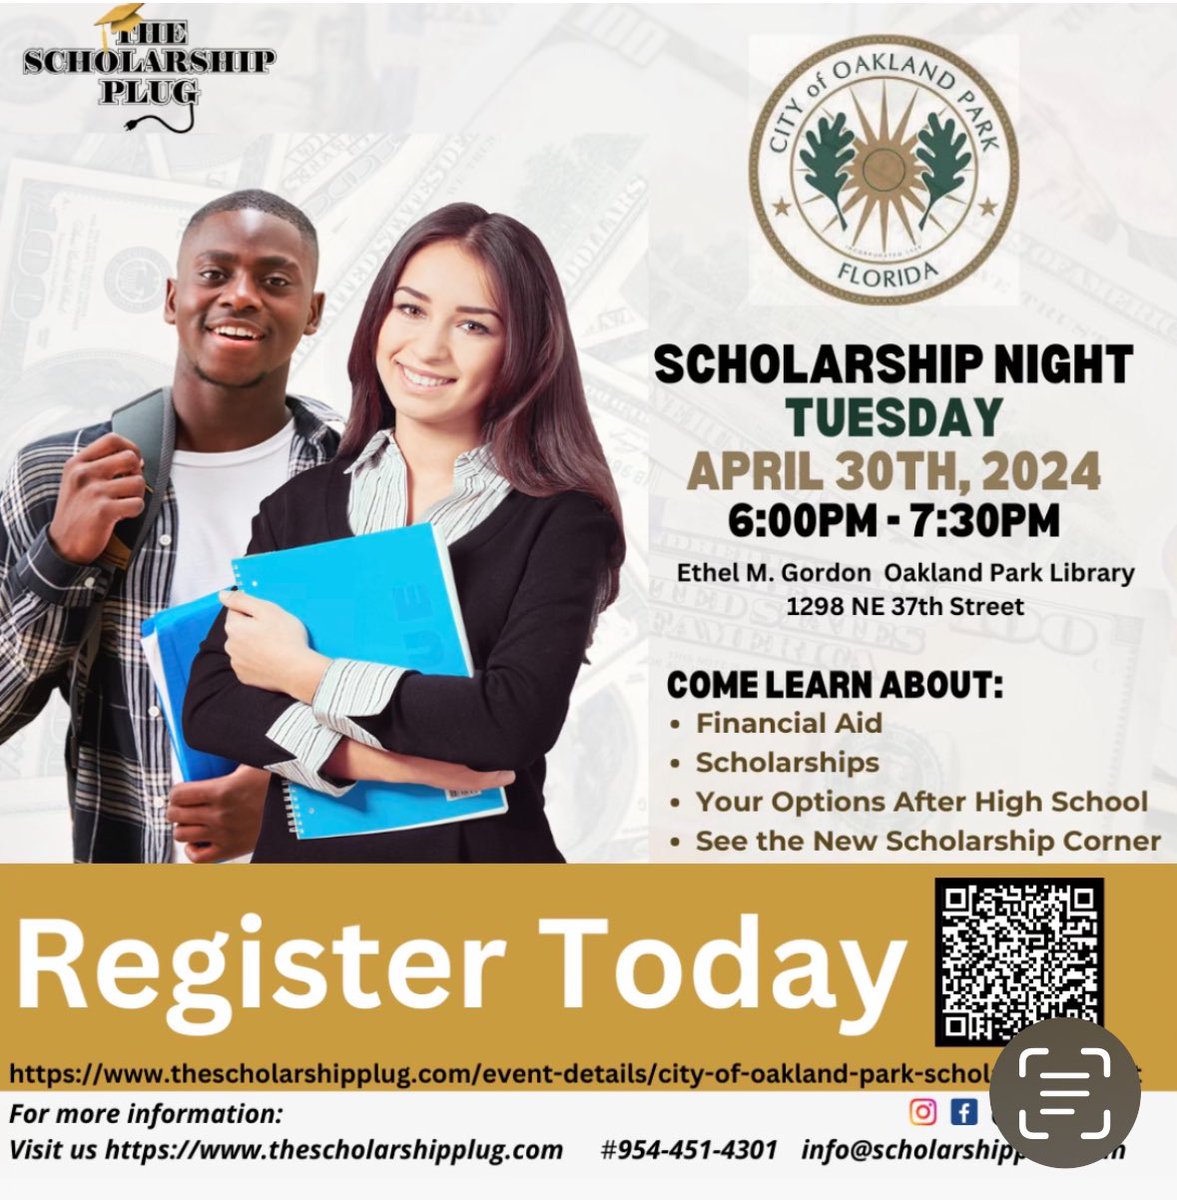 Canes, pls go to this FREE talk on SCHOLARSHIPS! @shedlycasseus is AMAZING & will help you w/ ALL the possible $$ for post HS opportunities!It is on Tuesday- grades 9-12- ATTEND! Never too soon! @Hurricane_AP @nehs_sga @NEkeyclub @NEHSYearbooks @NEHurricaneBand @NortheastCanes